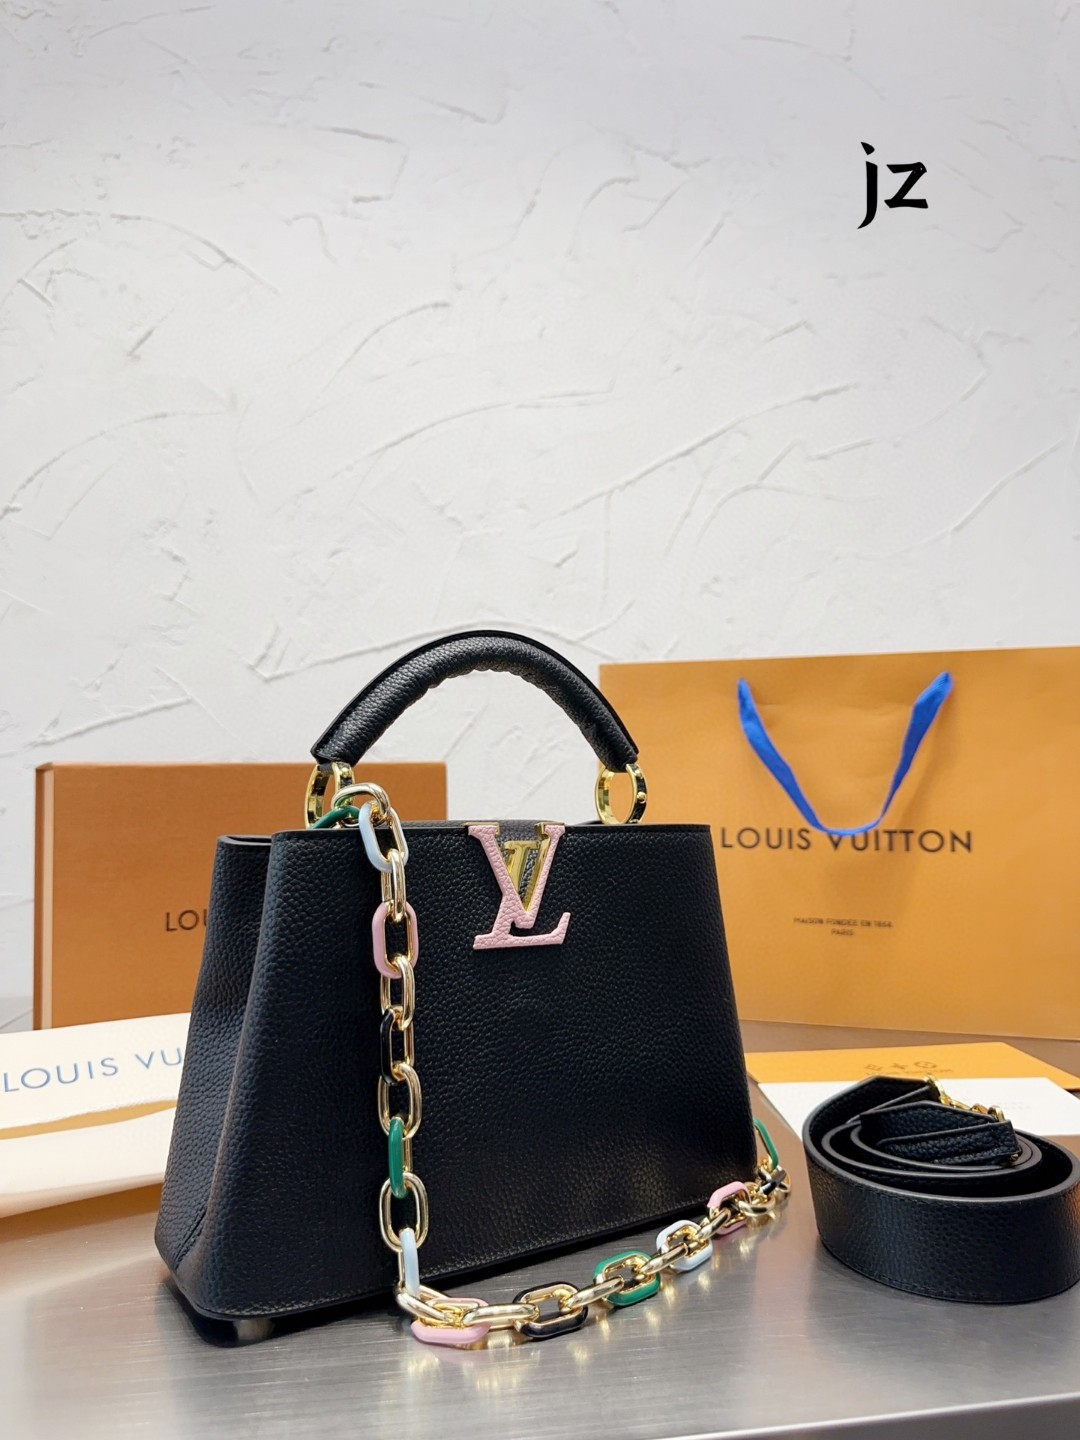 Louis Vuitton Multi Pochette Bag, Gallery posted by Meeesher